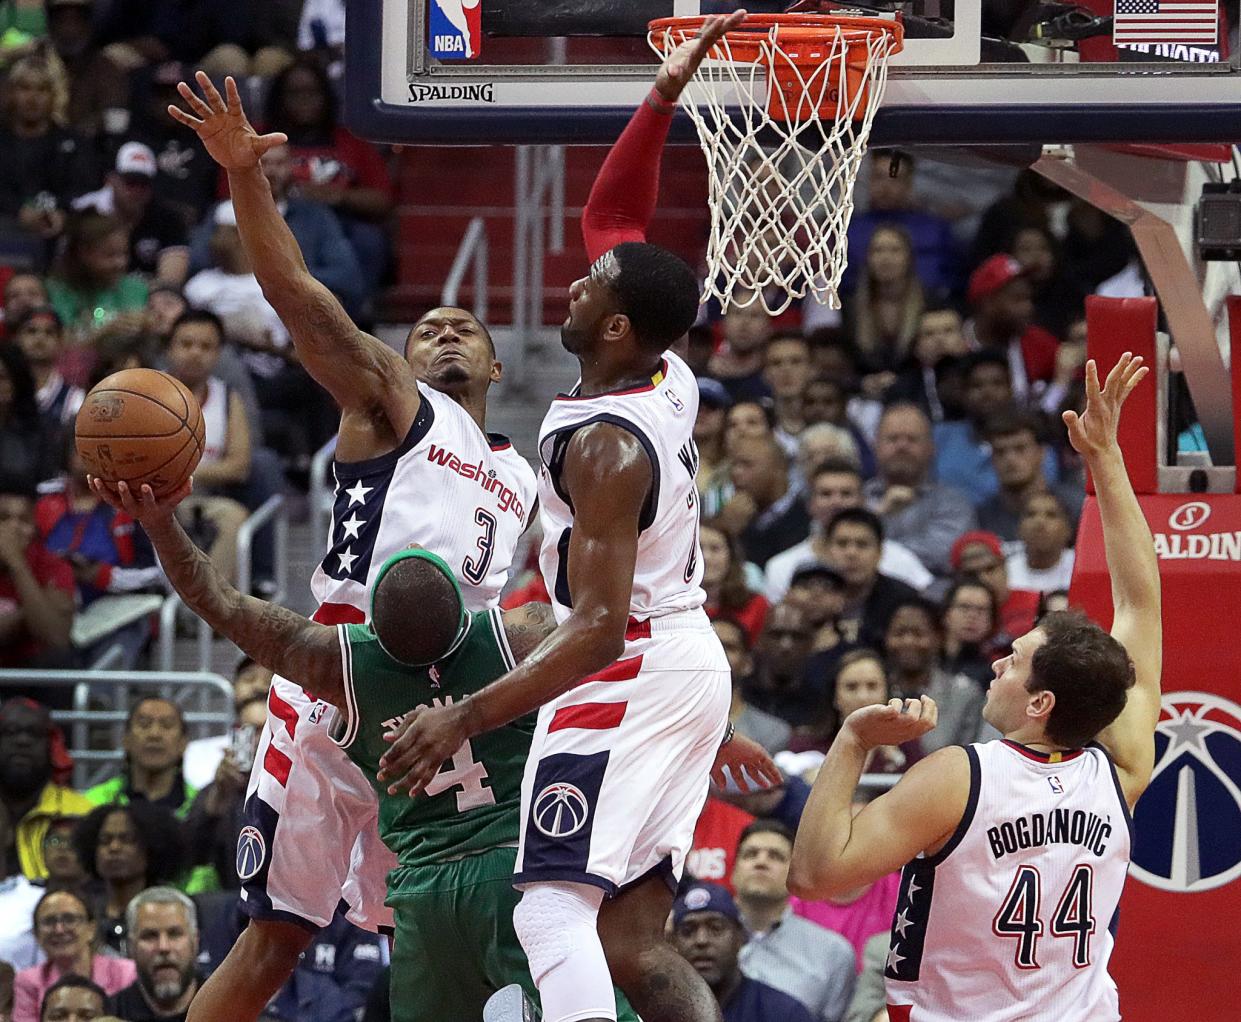 Bradley Beal, John Wall and the Wizards totally snuffed out Isaiah Thomas and the Celtics' offense in Game 3. (Barry Chin/The Boston Globe/Getty Images)